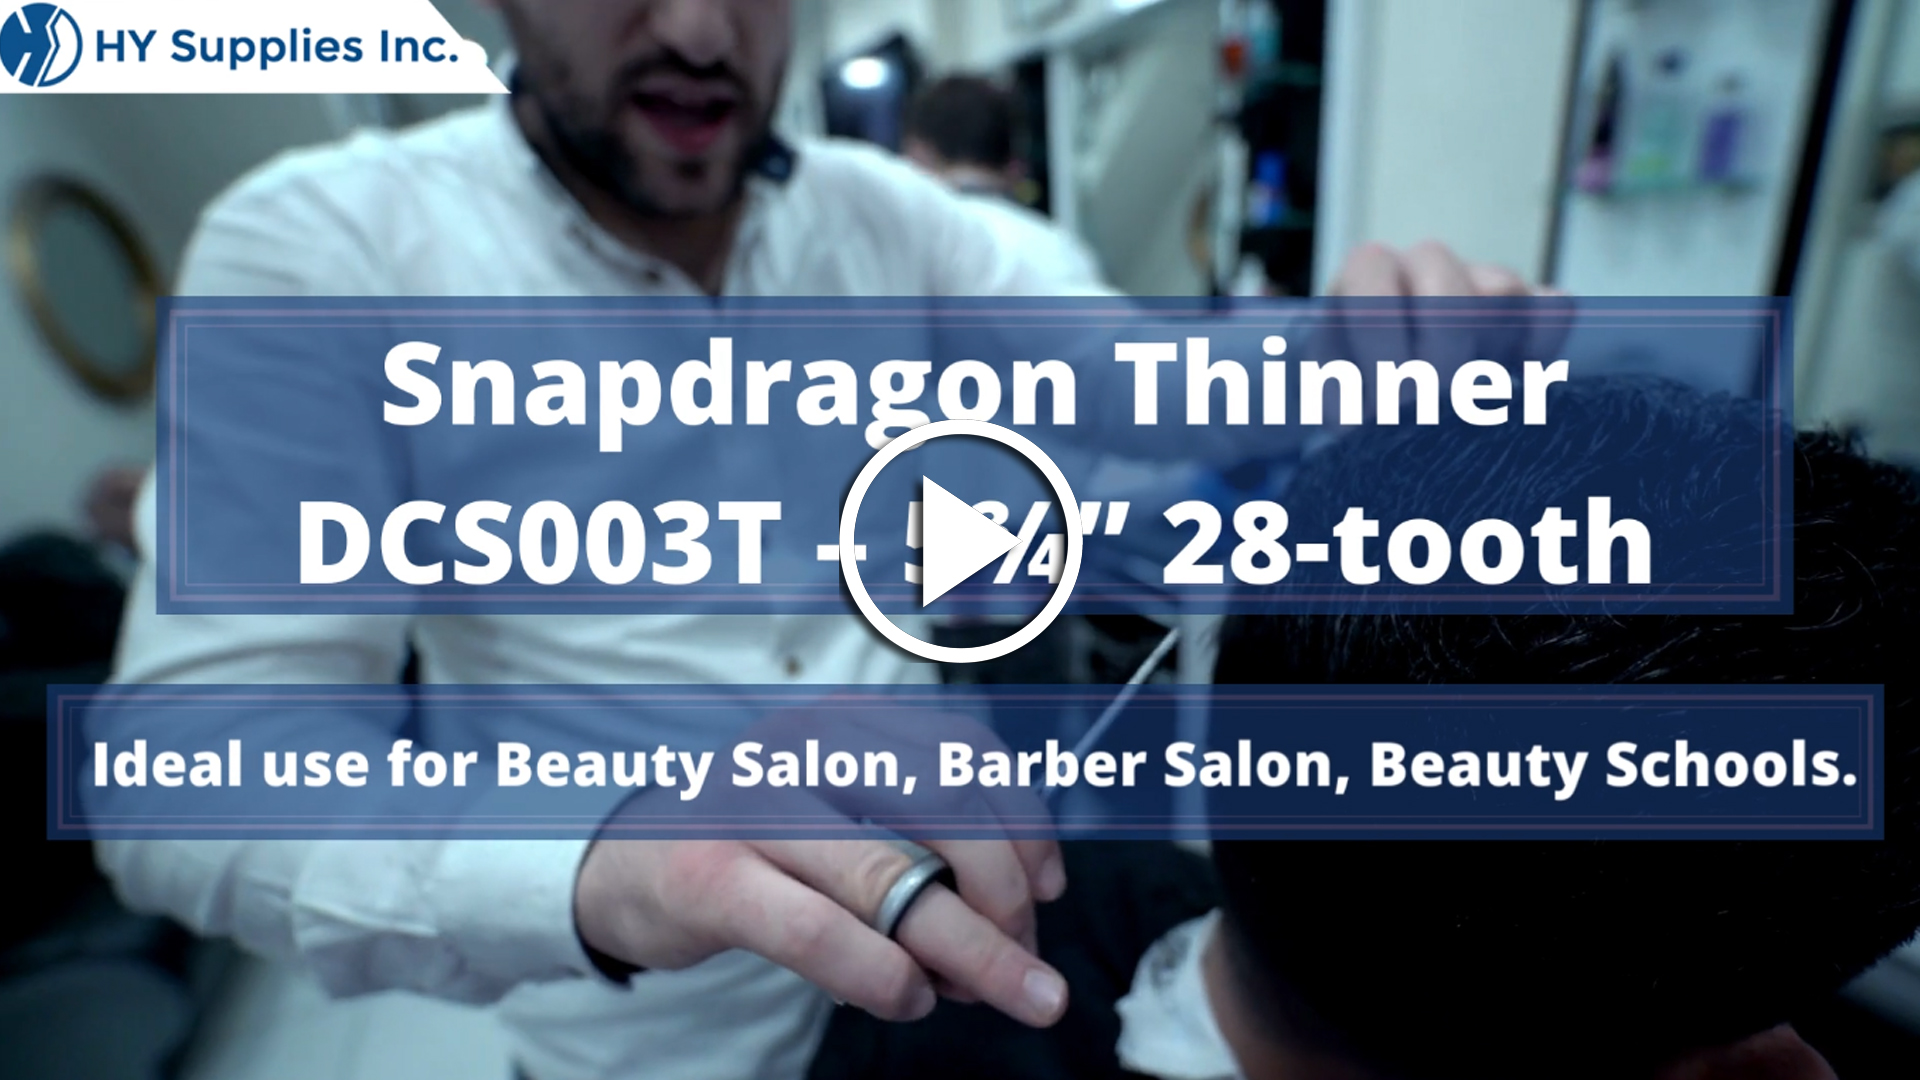 Snapdragon Thinner DCS003T – 5¾” 28-tooth